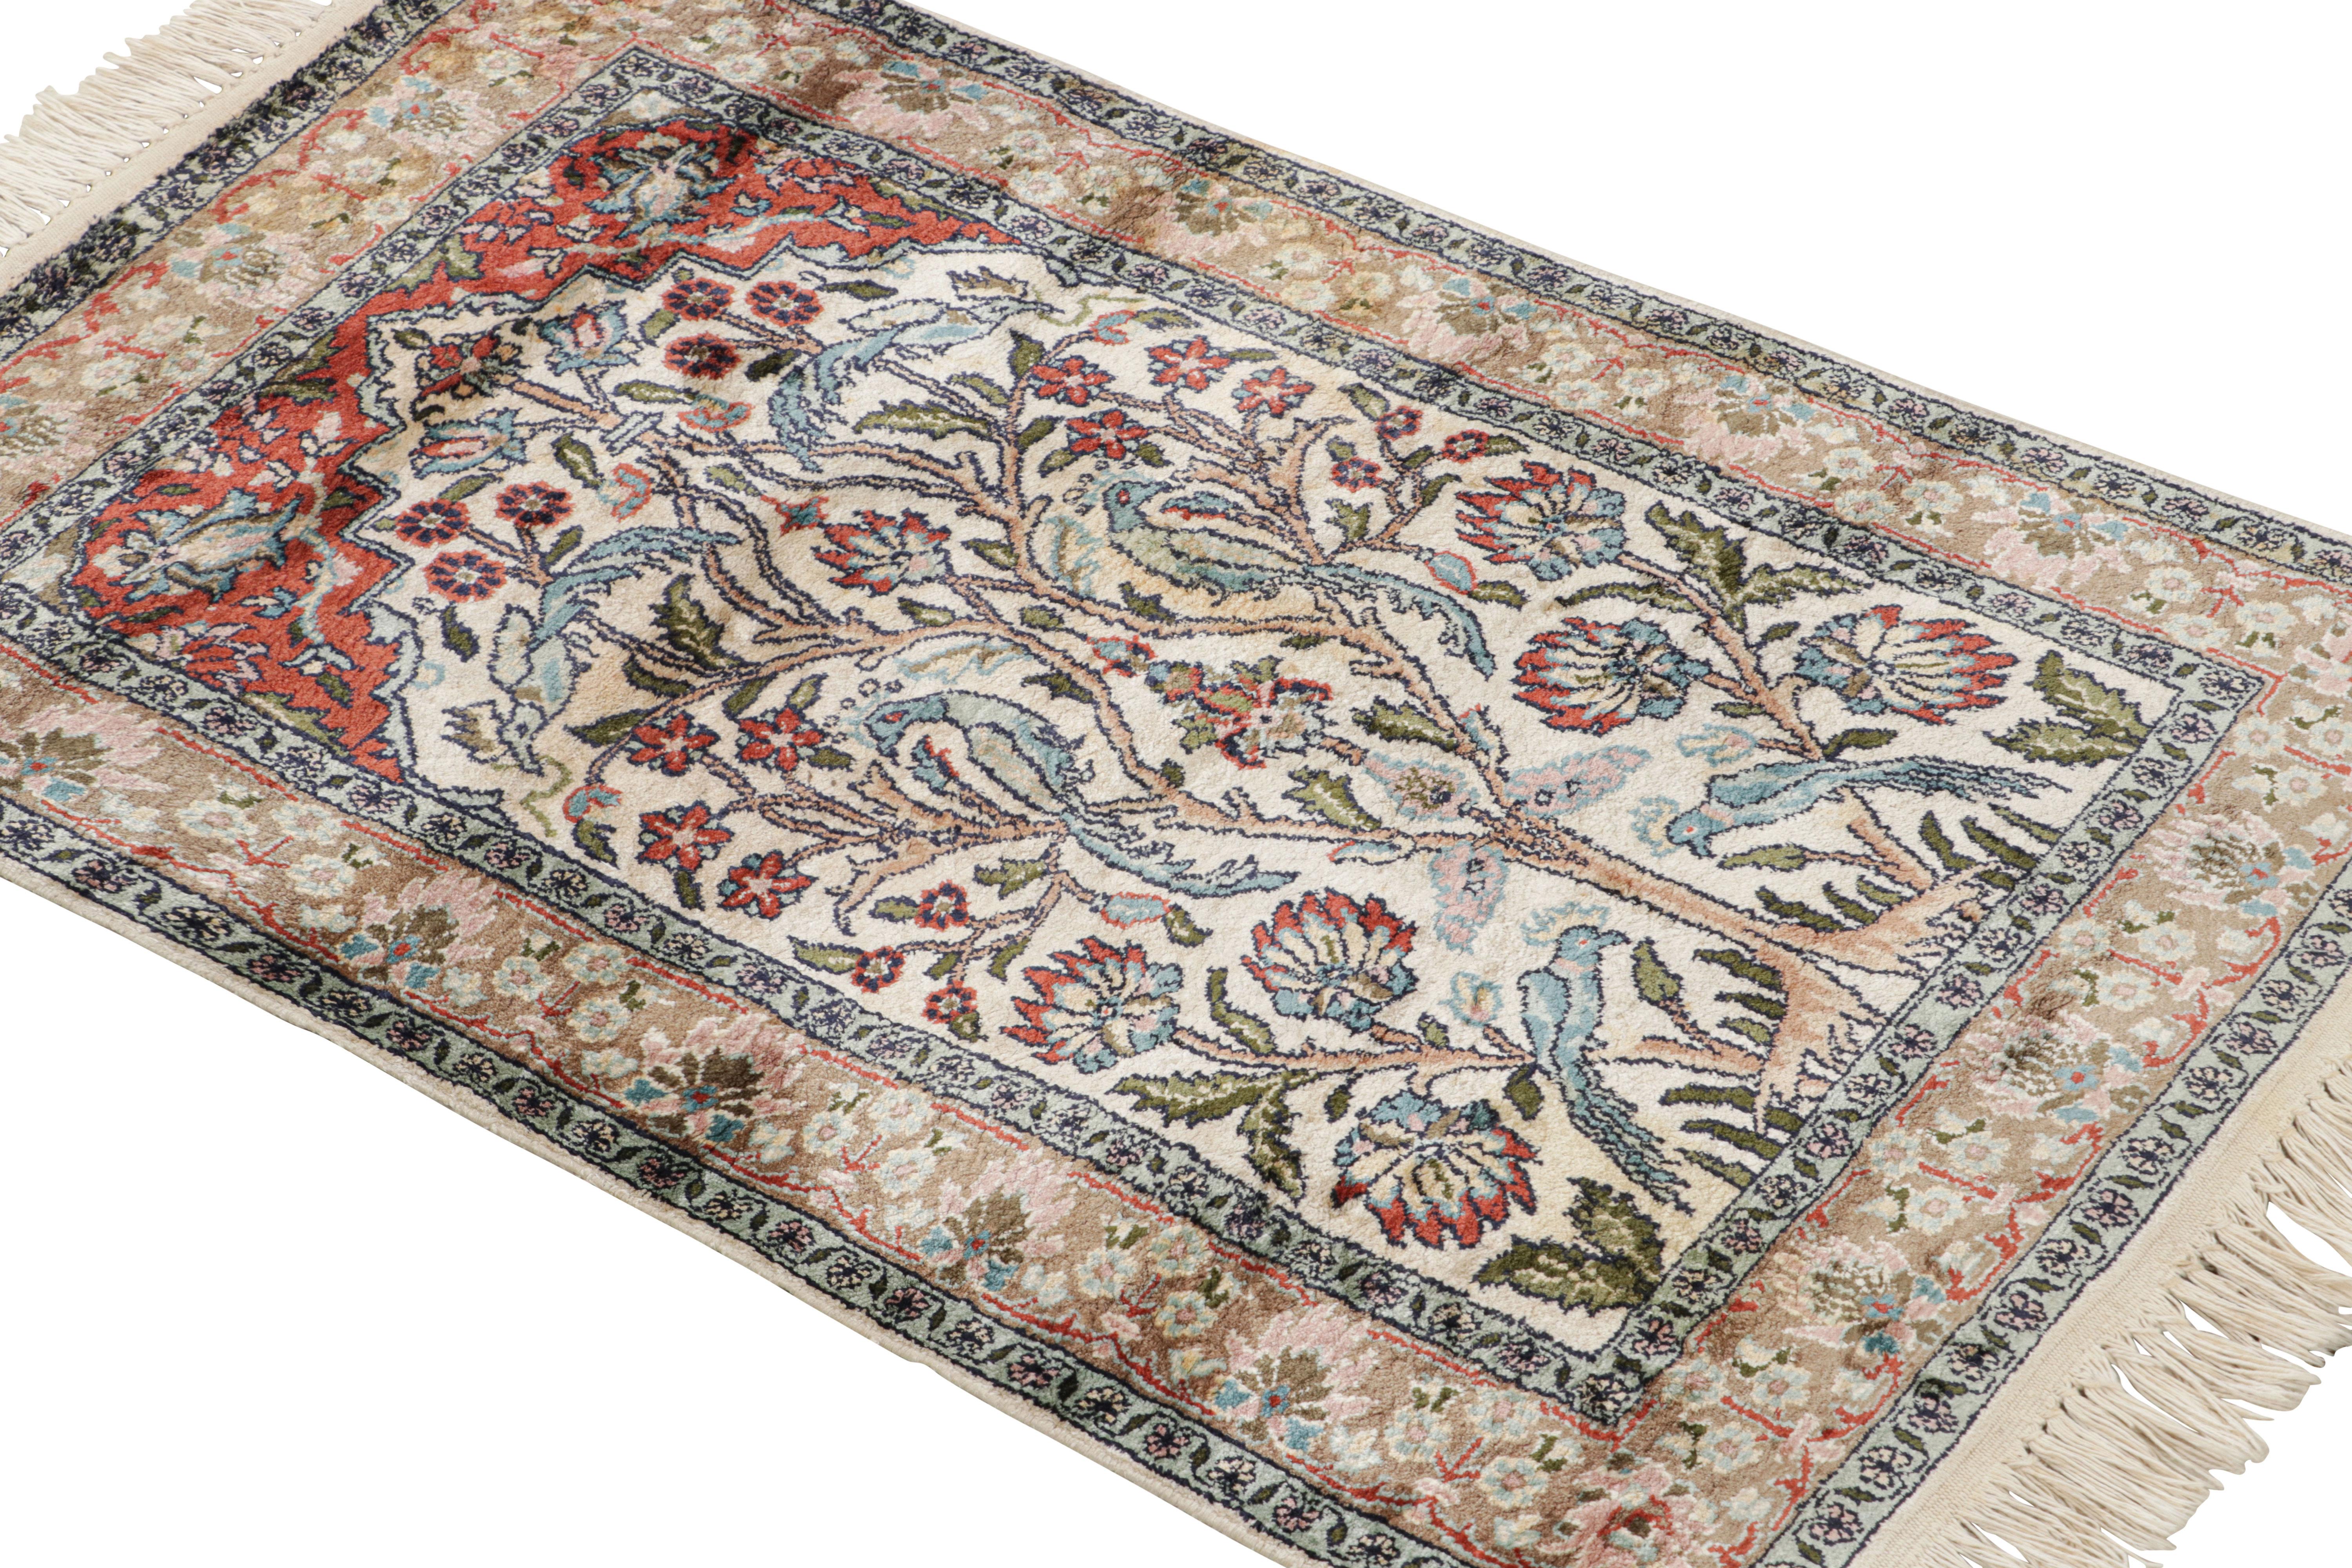 Made with hand-knotted Kashmir wool, this 2x3 rug from our Modern Classics Collection represents one of our most luxurious new takes on a classic–particularly a pictorial design like those seen in Persian Kashan rugs and similar, rare